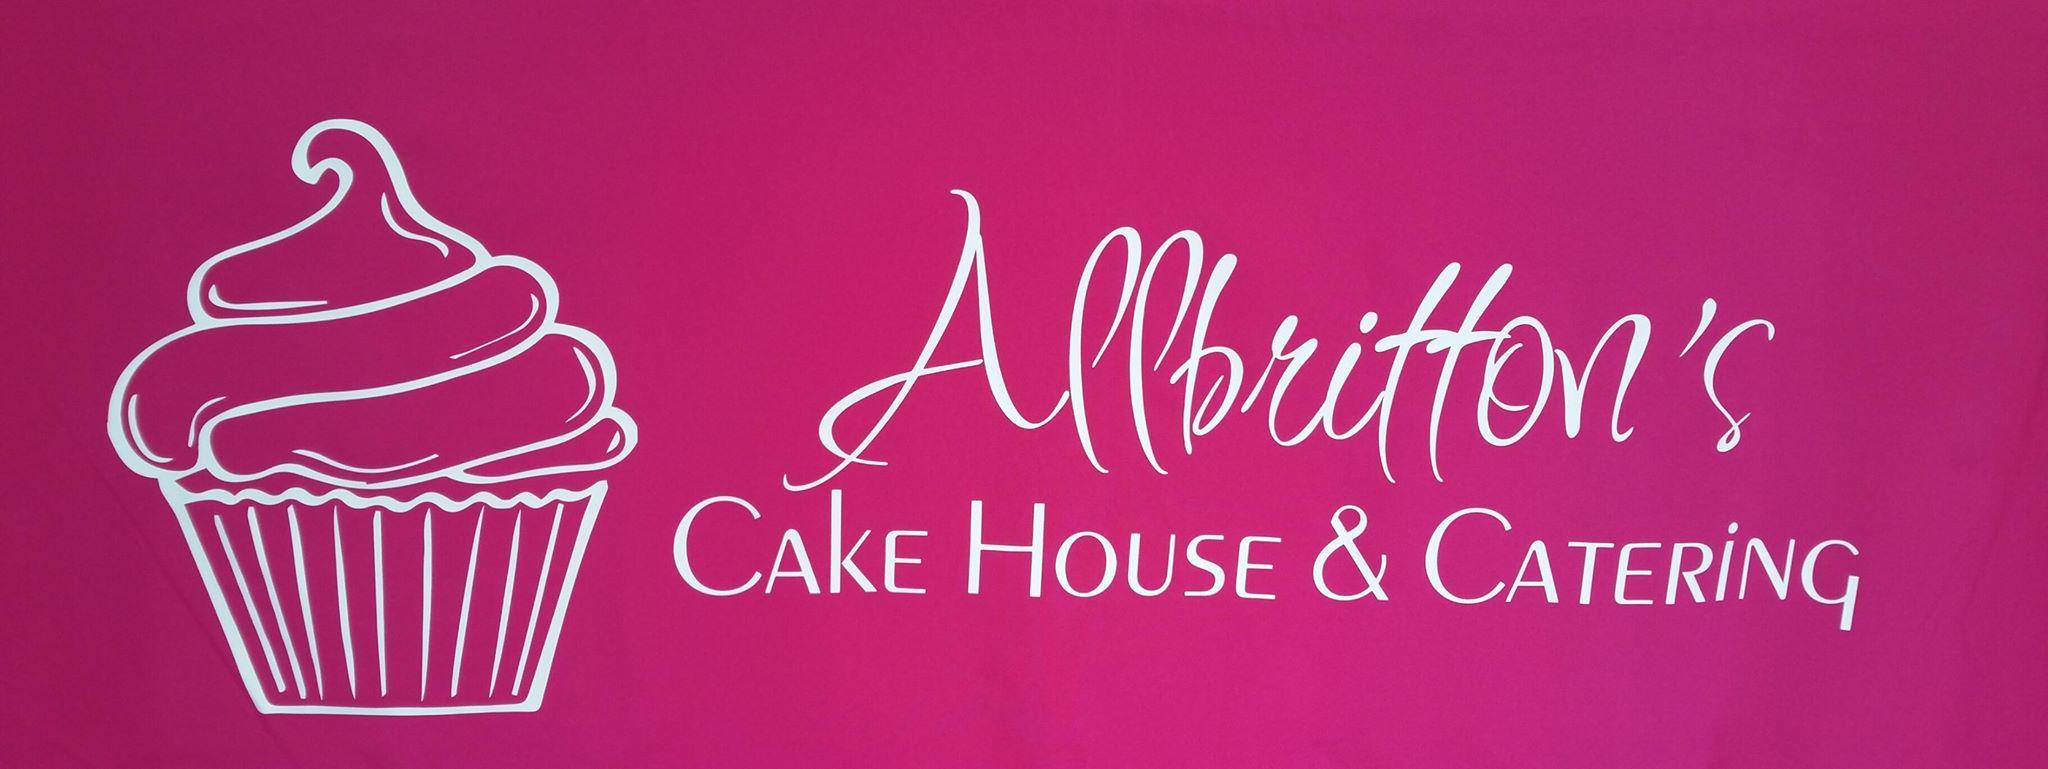 Allbritton's Cake House & Catering Photo